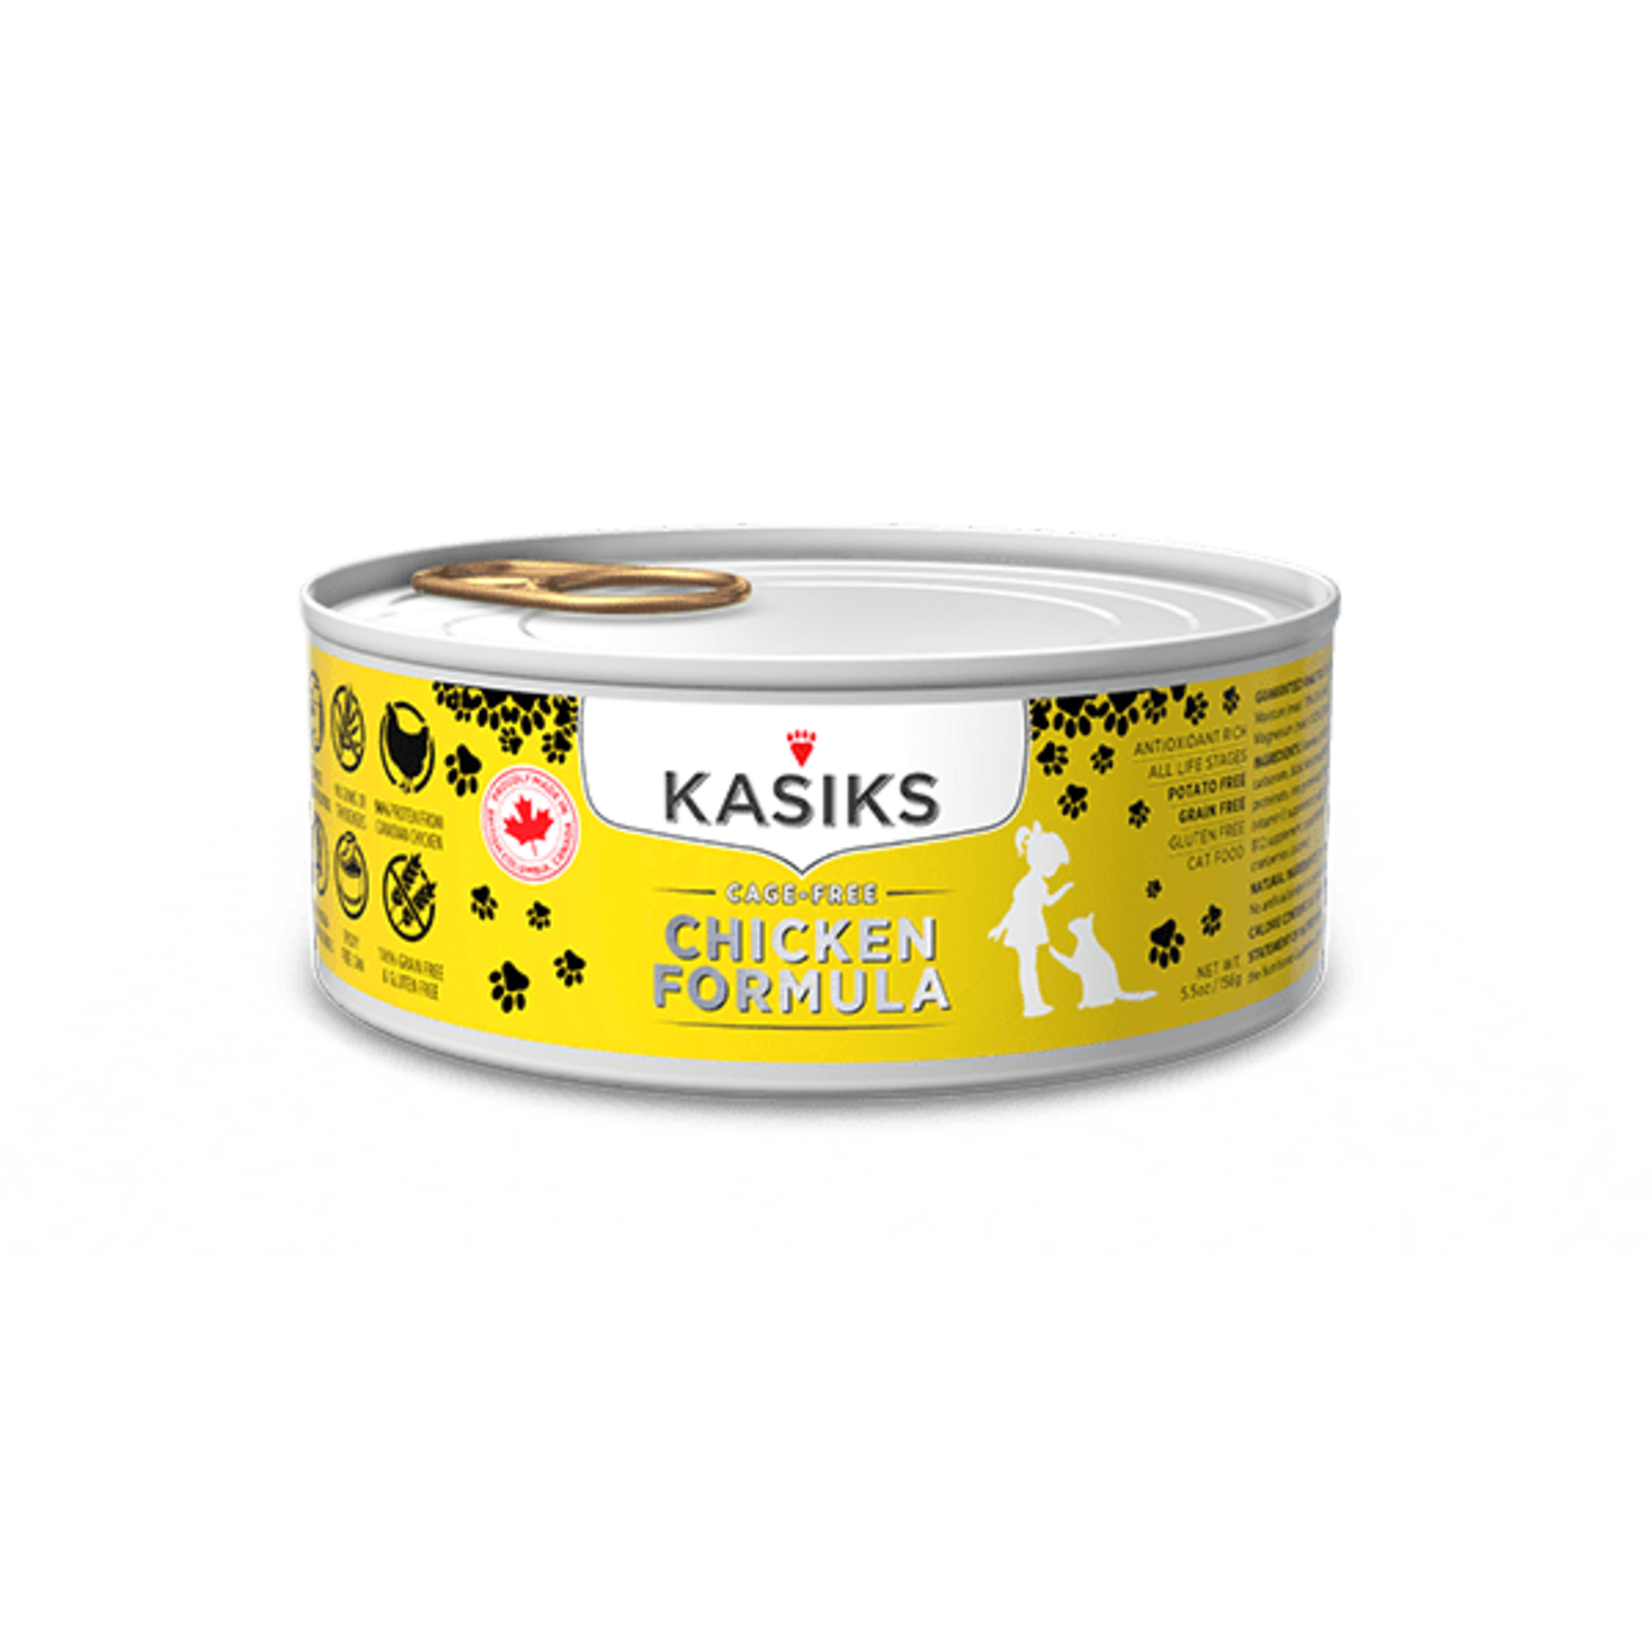 FirstMate Pet Foods Kasiks Cage-Free Chicken Formula for Cats